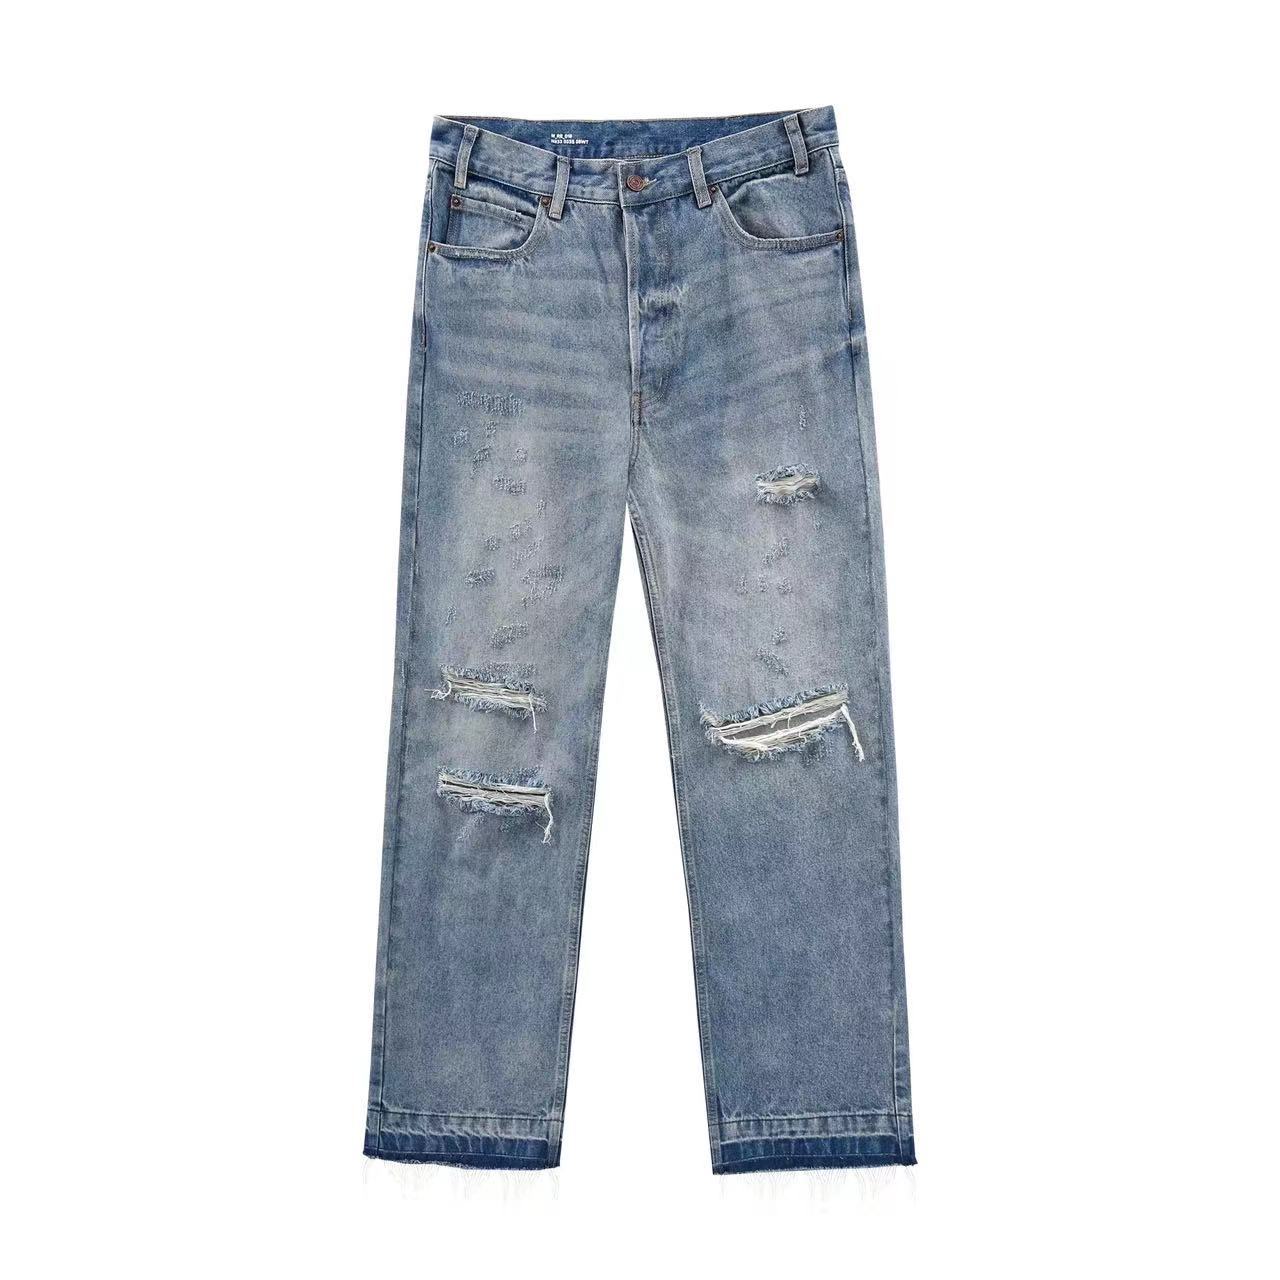 Ce Style Distressed Worn Blue Jeans Tassel Stitching Cleanfit Personality Trendy Wear Trousers Couple Style